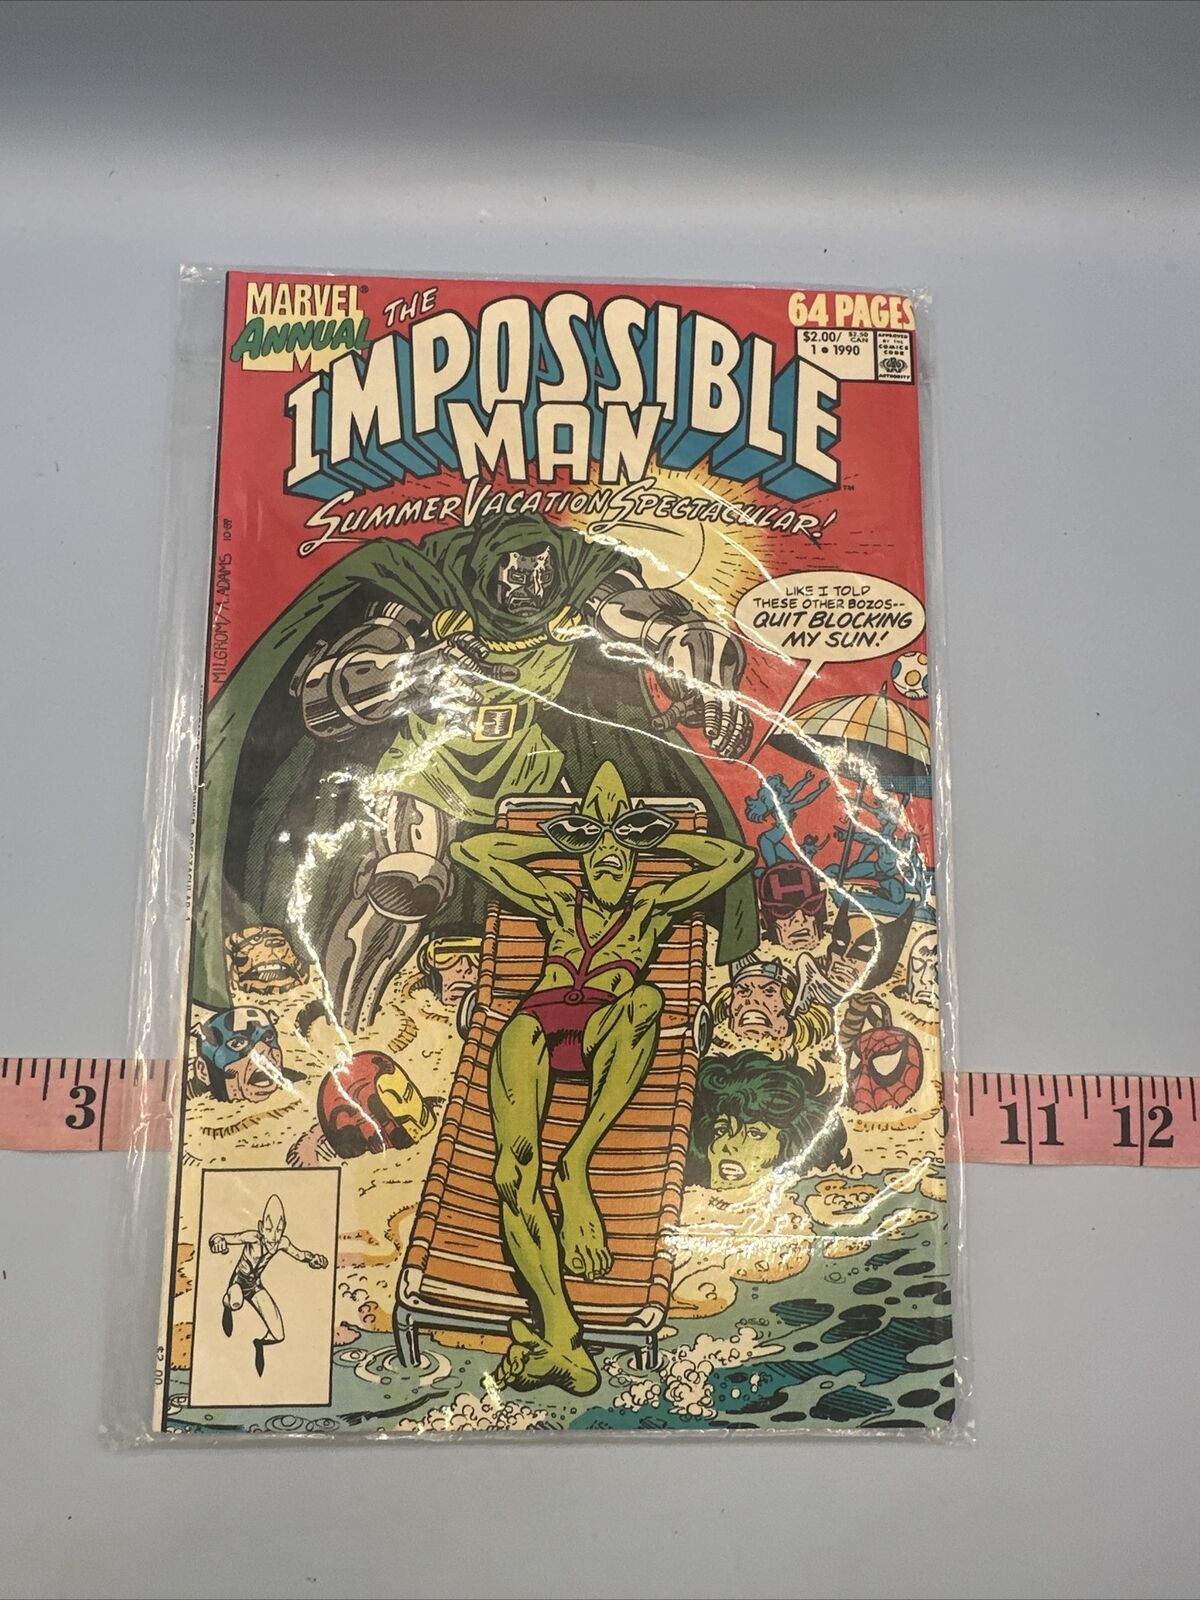 The Impossible Man: Summer Vacation Spectacular #1 (1990) Annual Marvel